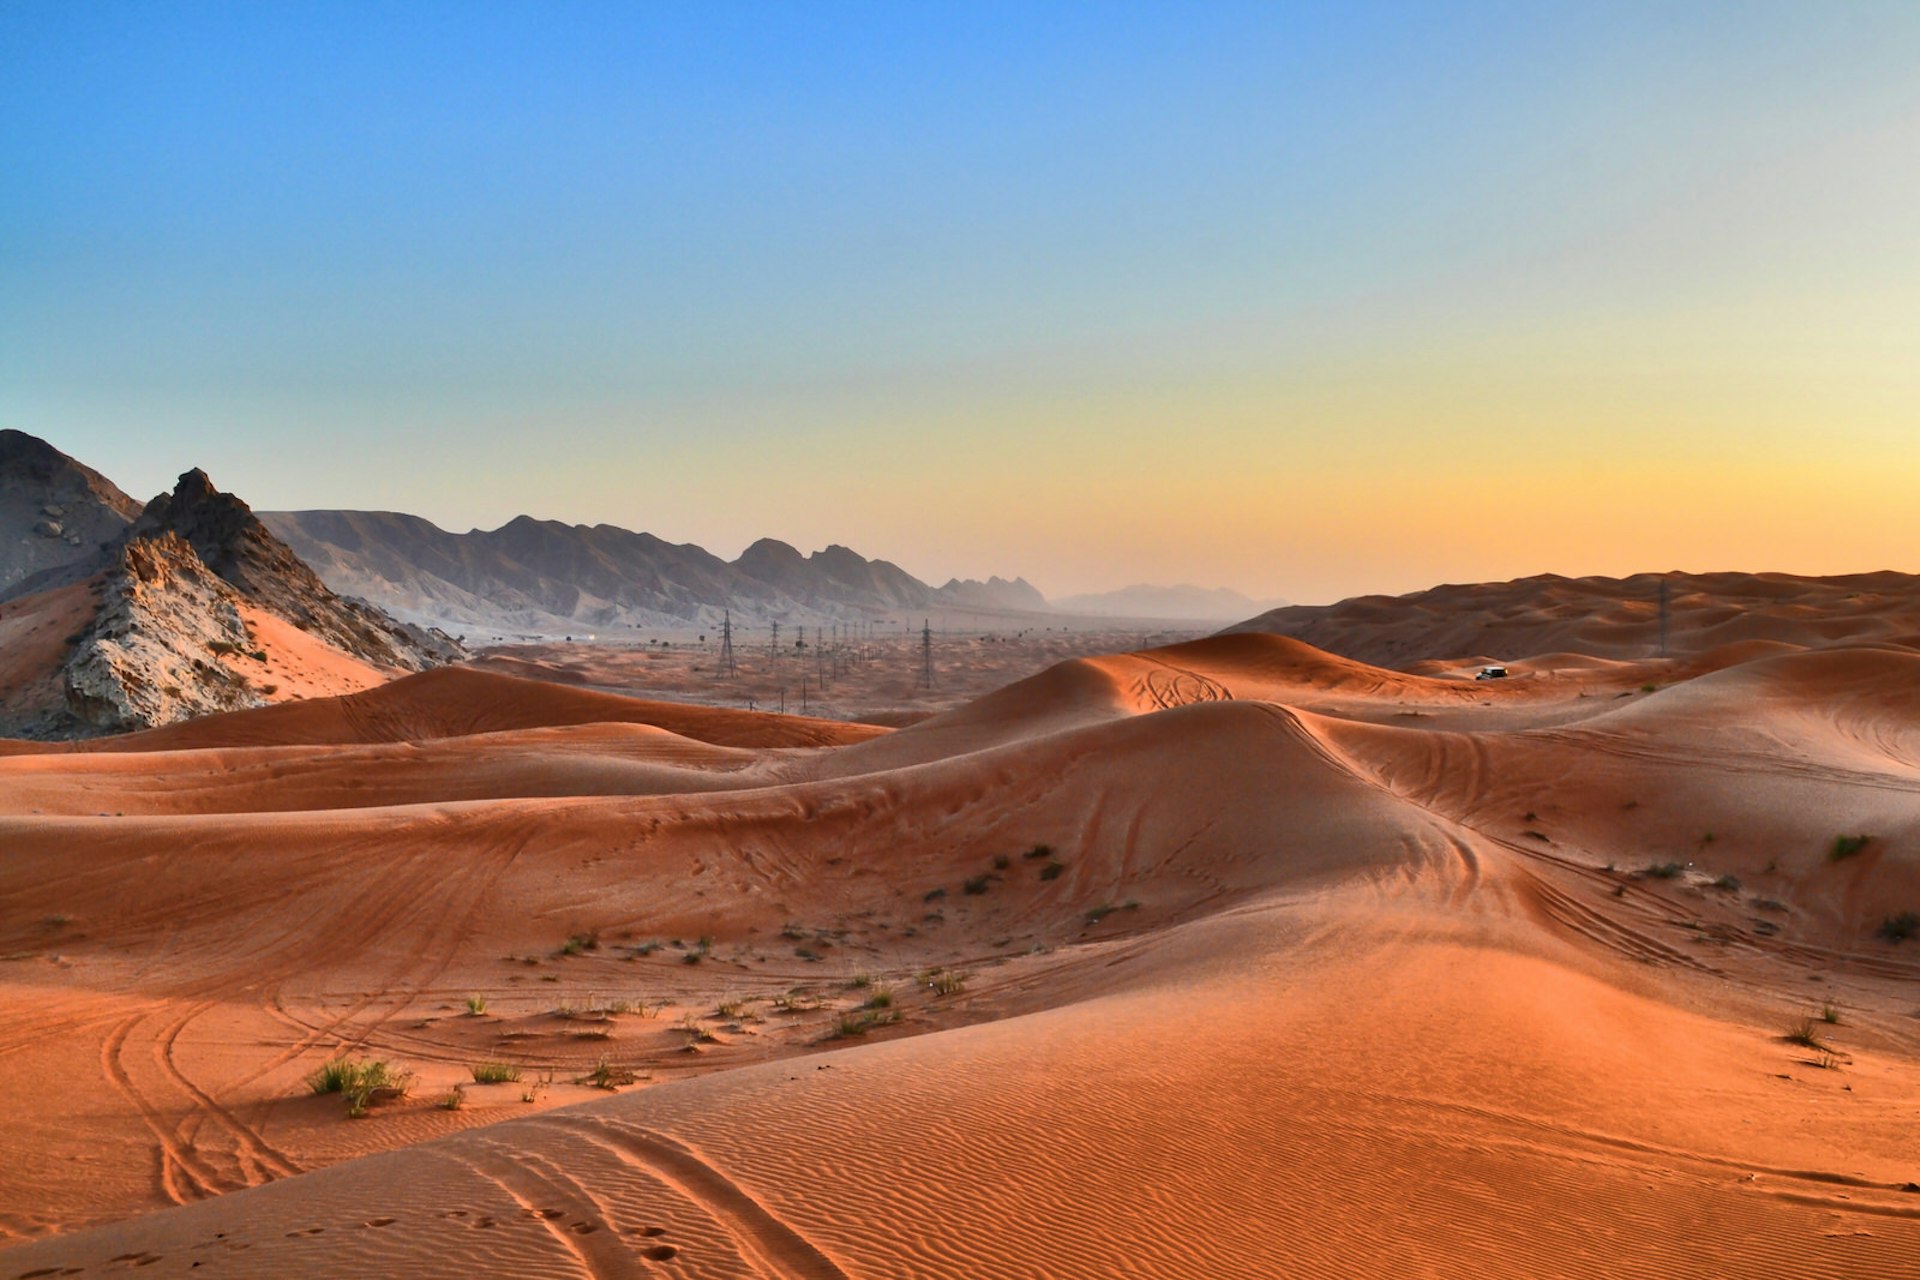 Sand dunes in front of the Hajar Mountains in the deserts of Sharjah, United Arab Emirates